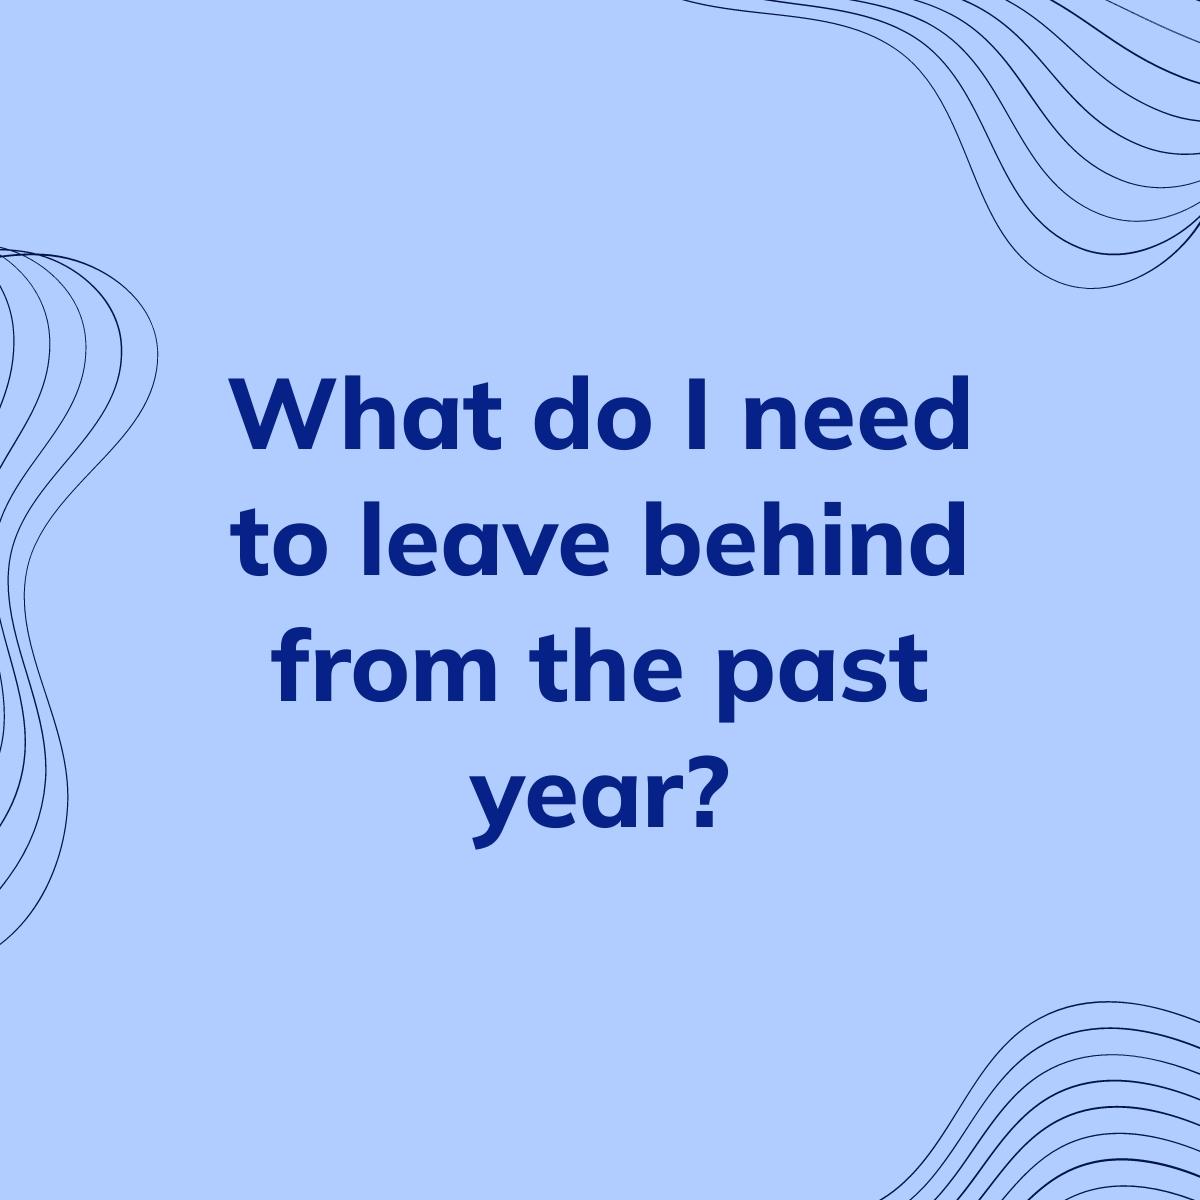 Journal Prompt: What do I need to leave behind from the past year?